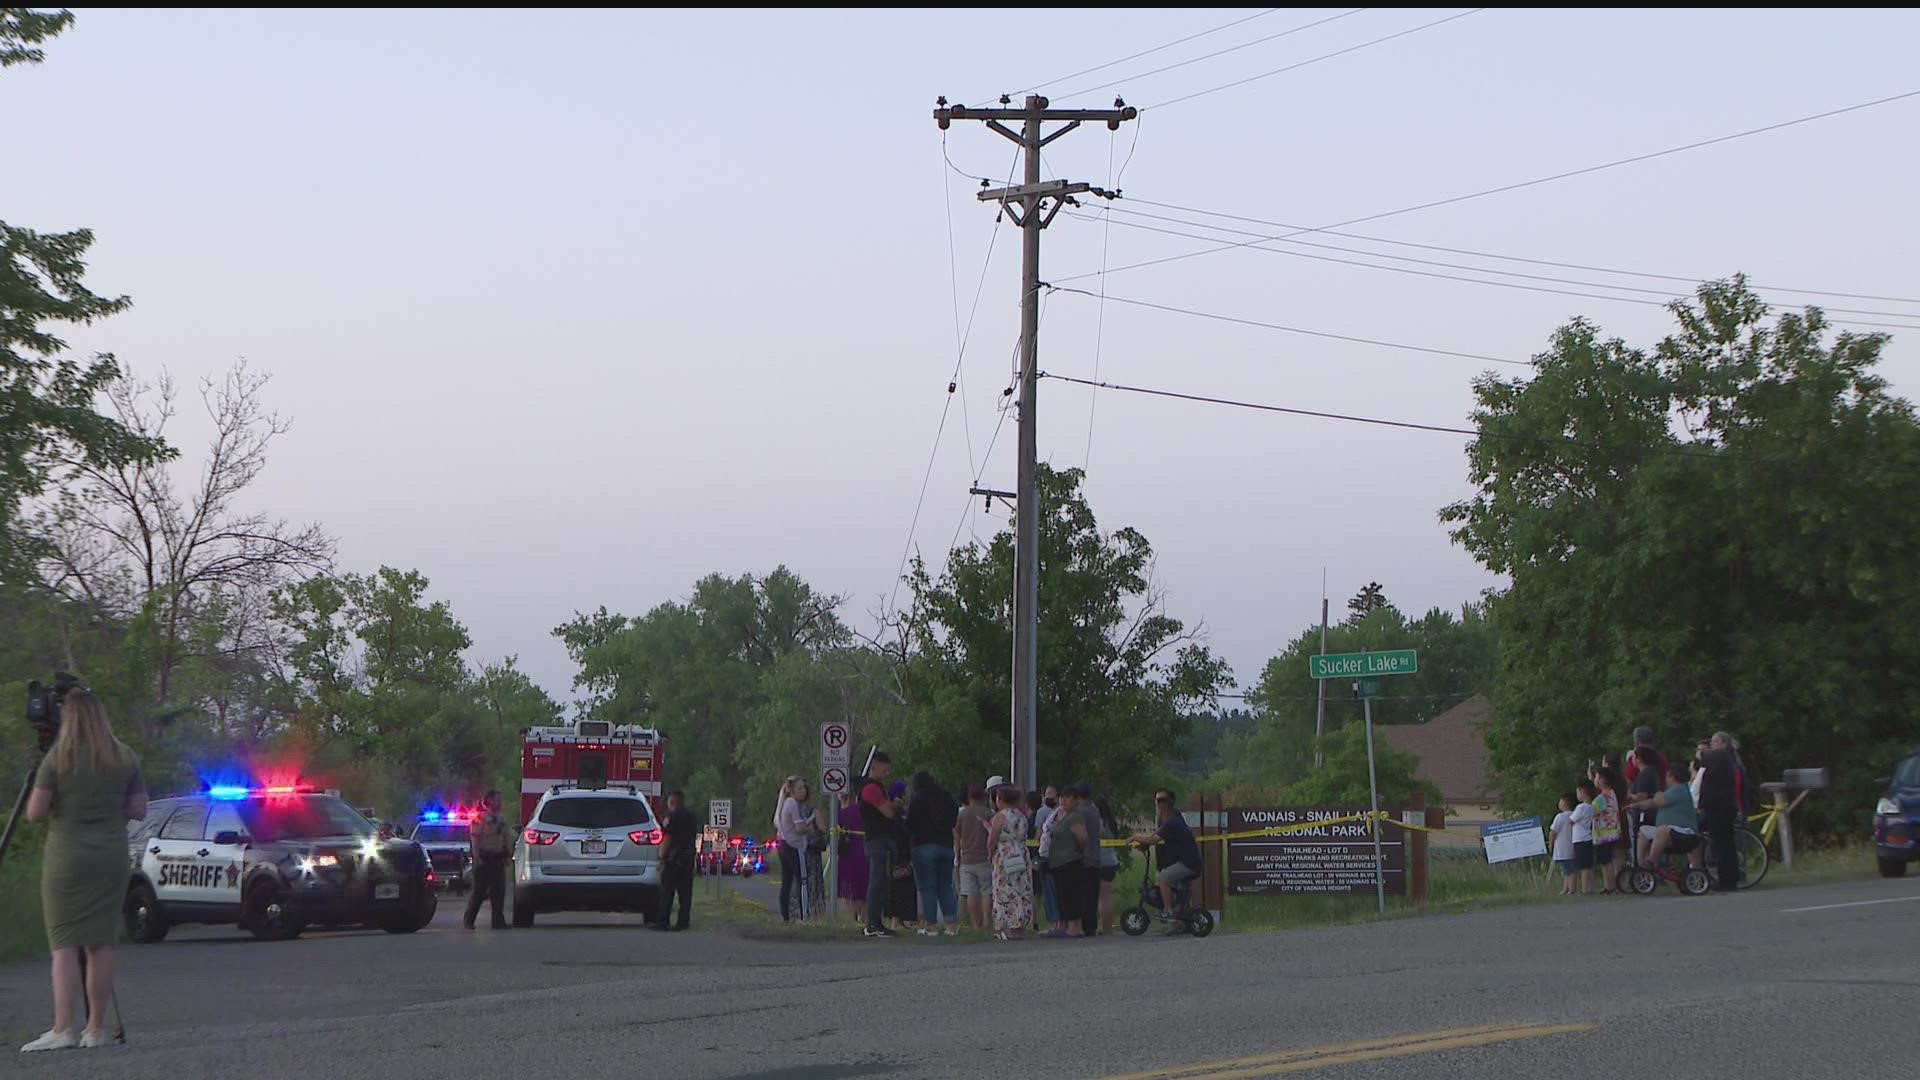 Police confirmed during a press conference on Saturday that all three children and a woman were recovered from the lake.